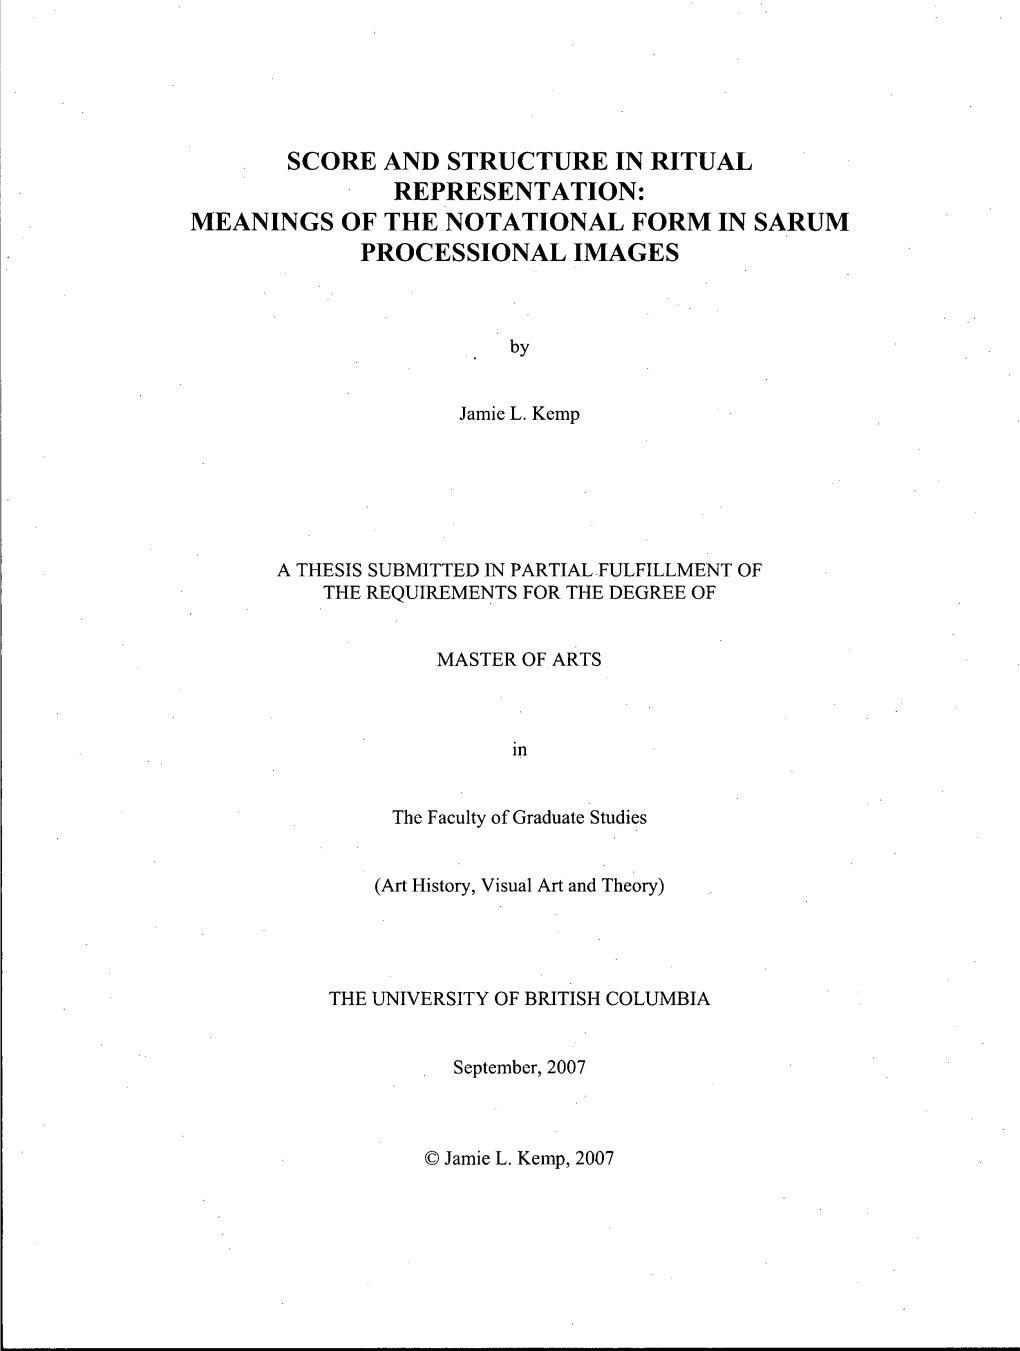 Meanings of the Notational Form in Sarum Processional Images